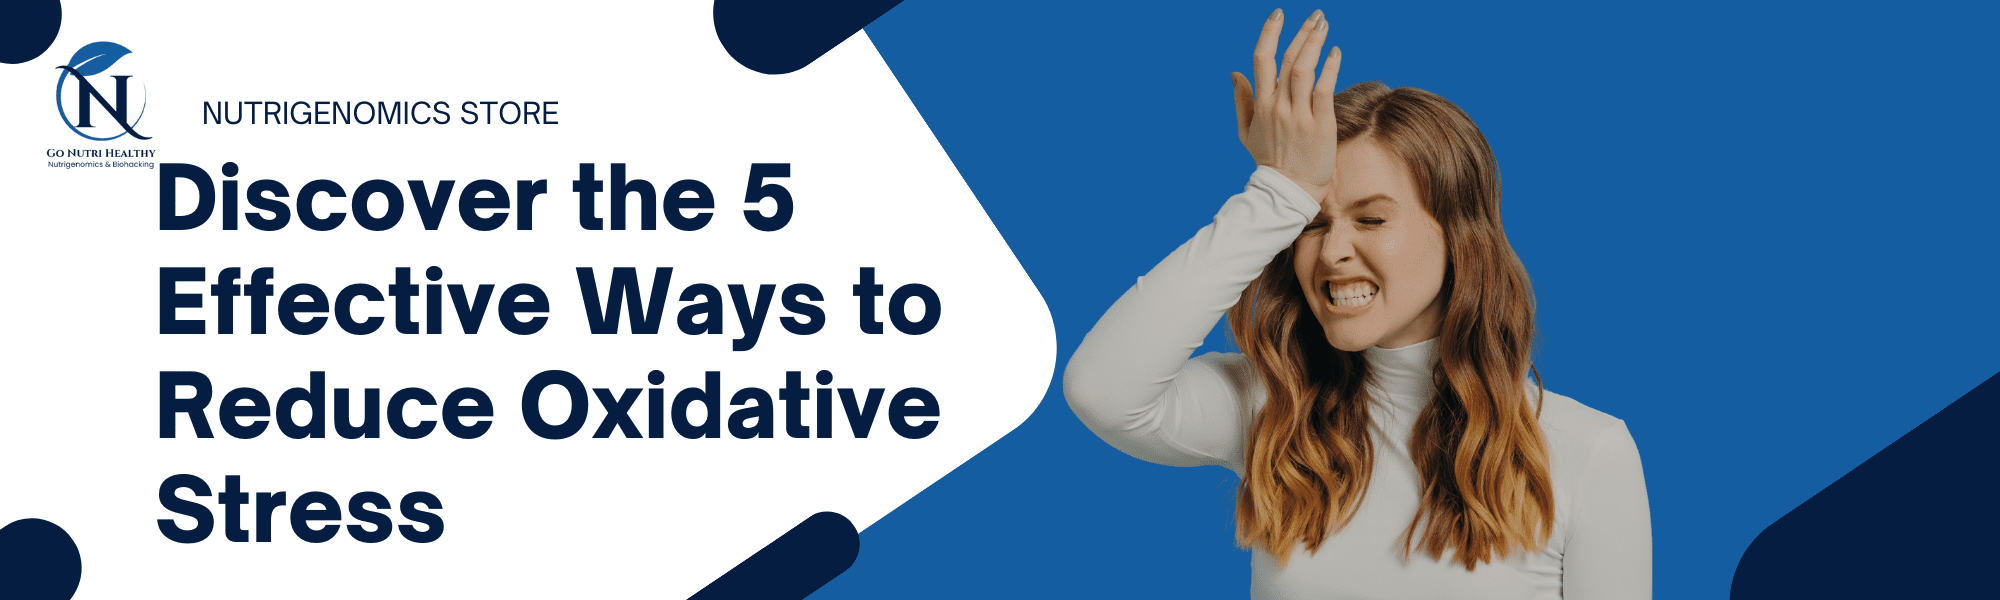 Discover the 5 Effective Ways to Reduce Oxidative Stress